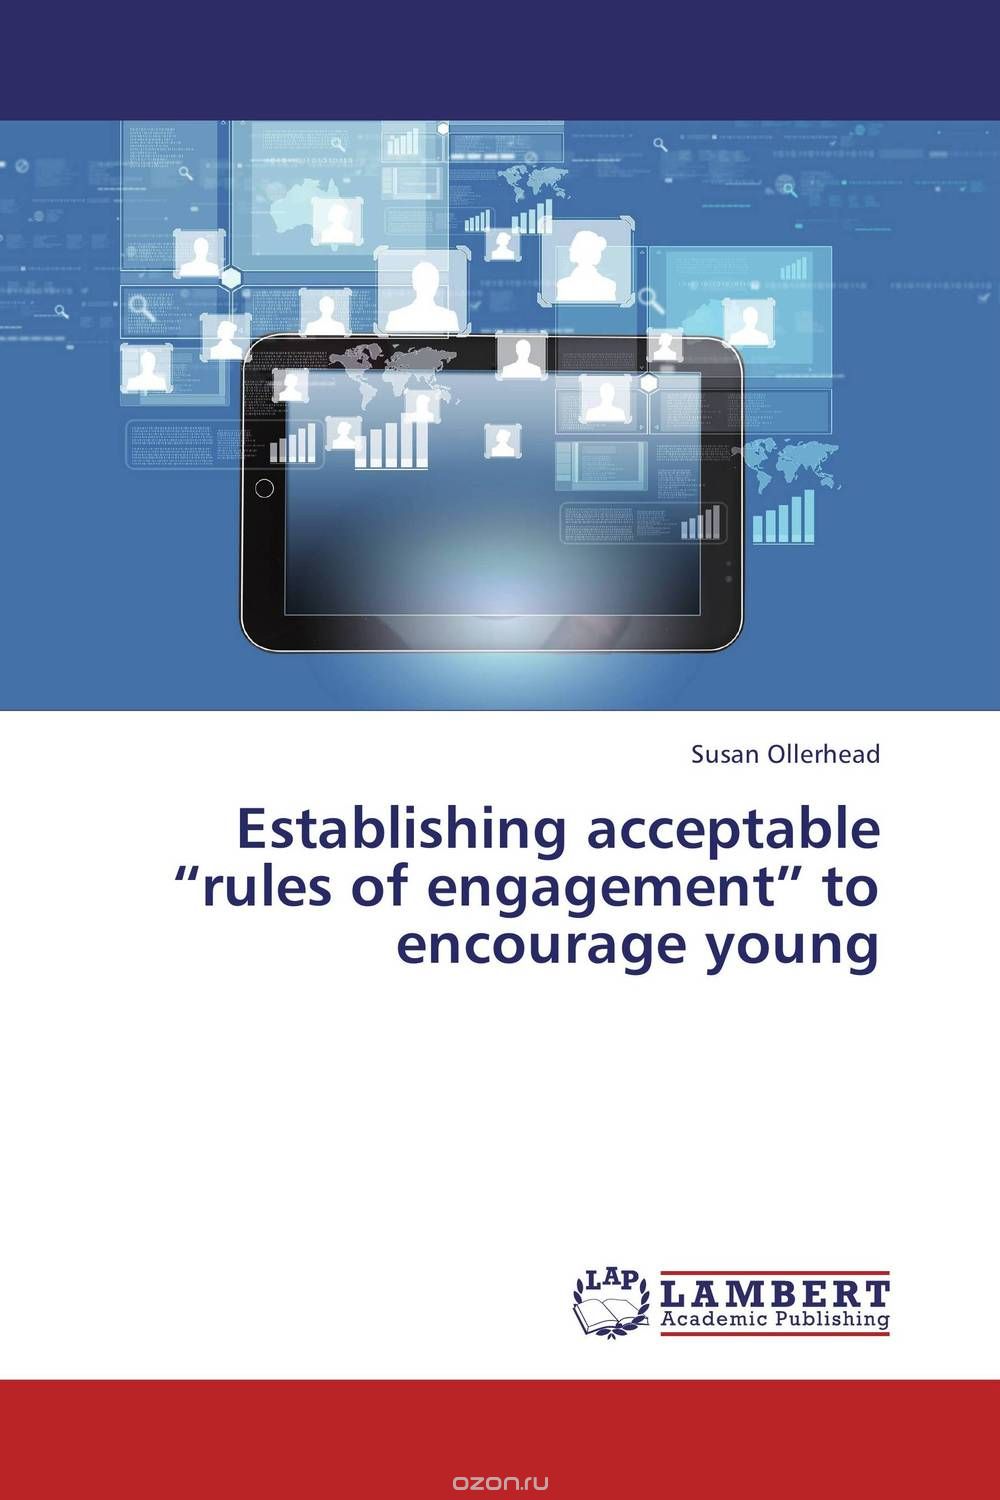 Establishing acceptable “rules of engagement” to encourage young